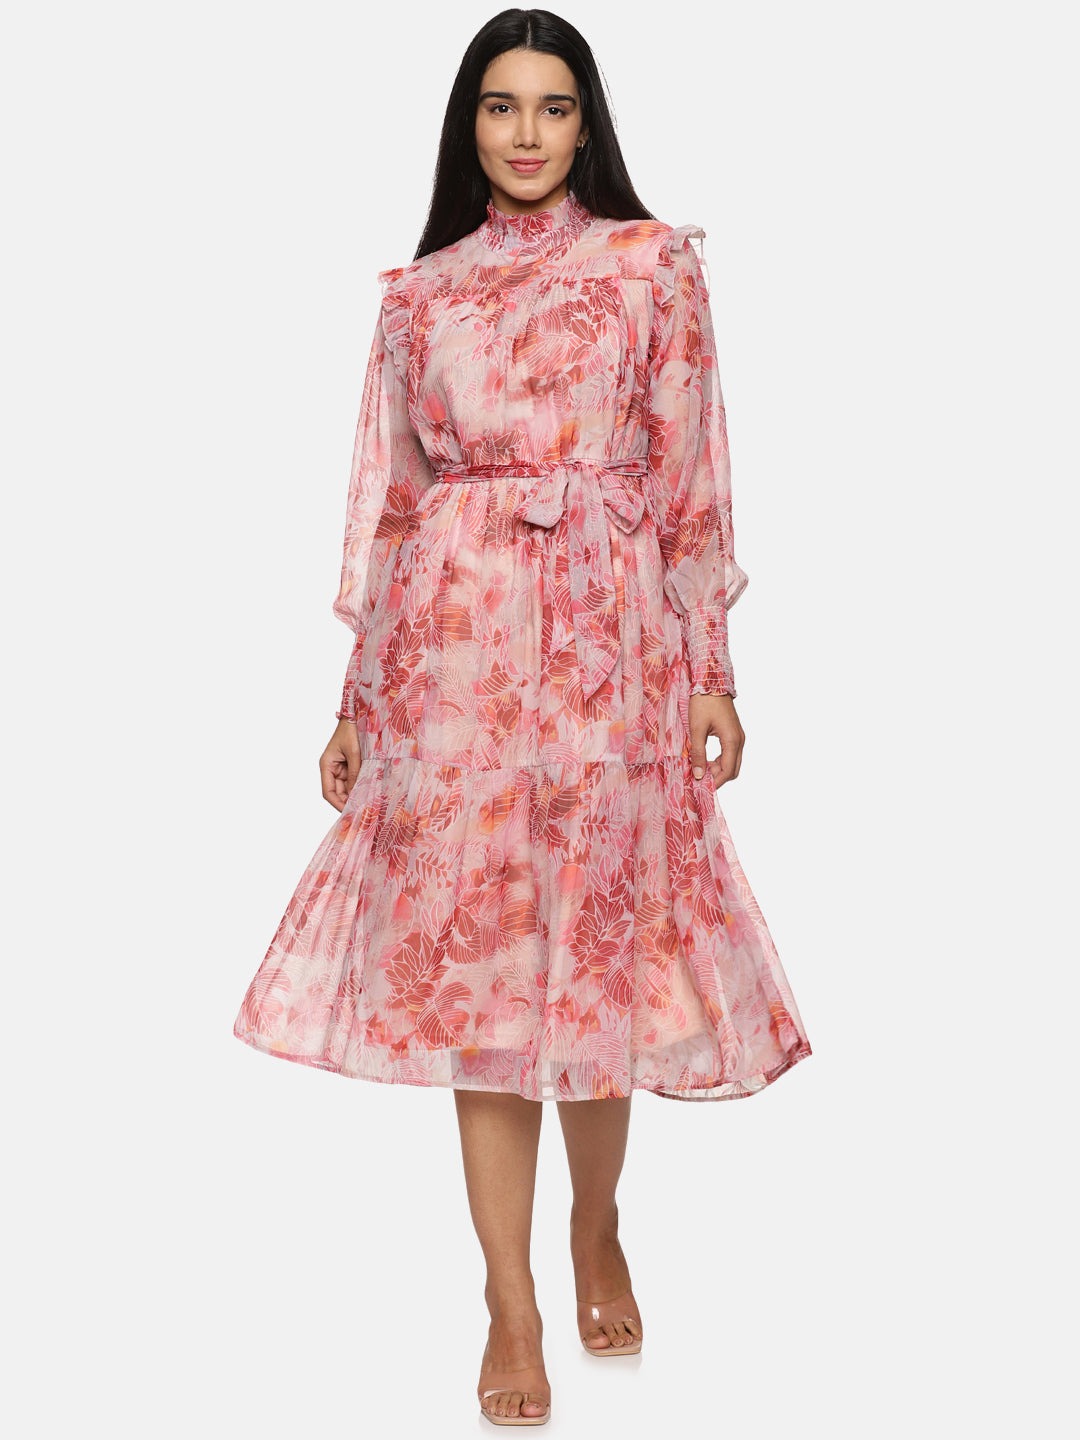 IS.U Red Floral Tiered Midaxi Dress